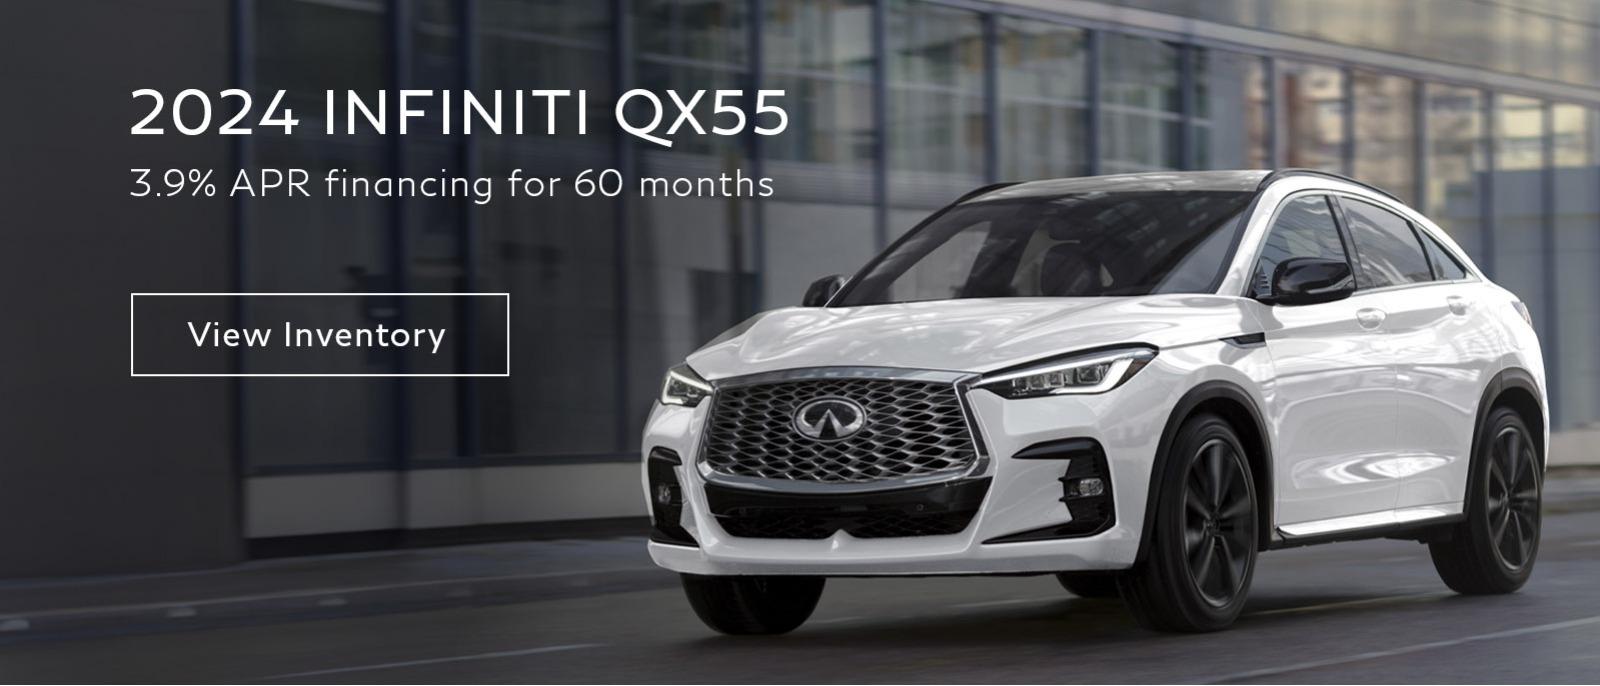 3.9% APR Financing for 60 Months on 2024 INFINITI QX55